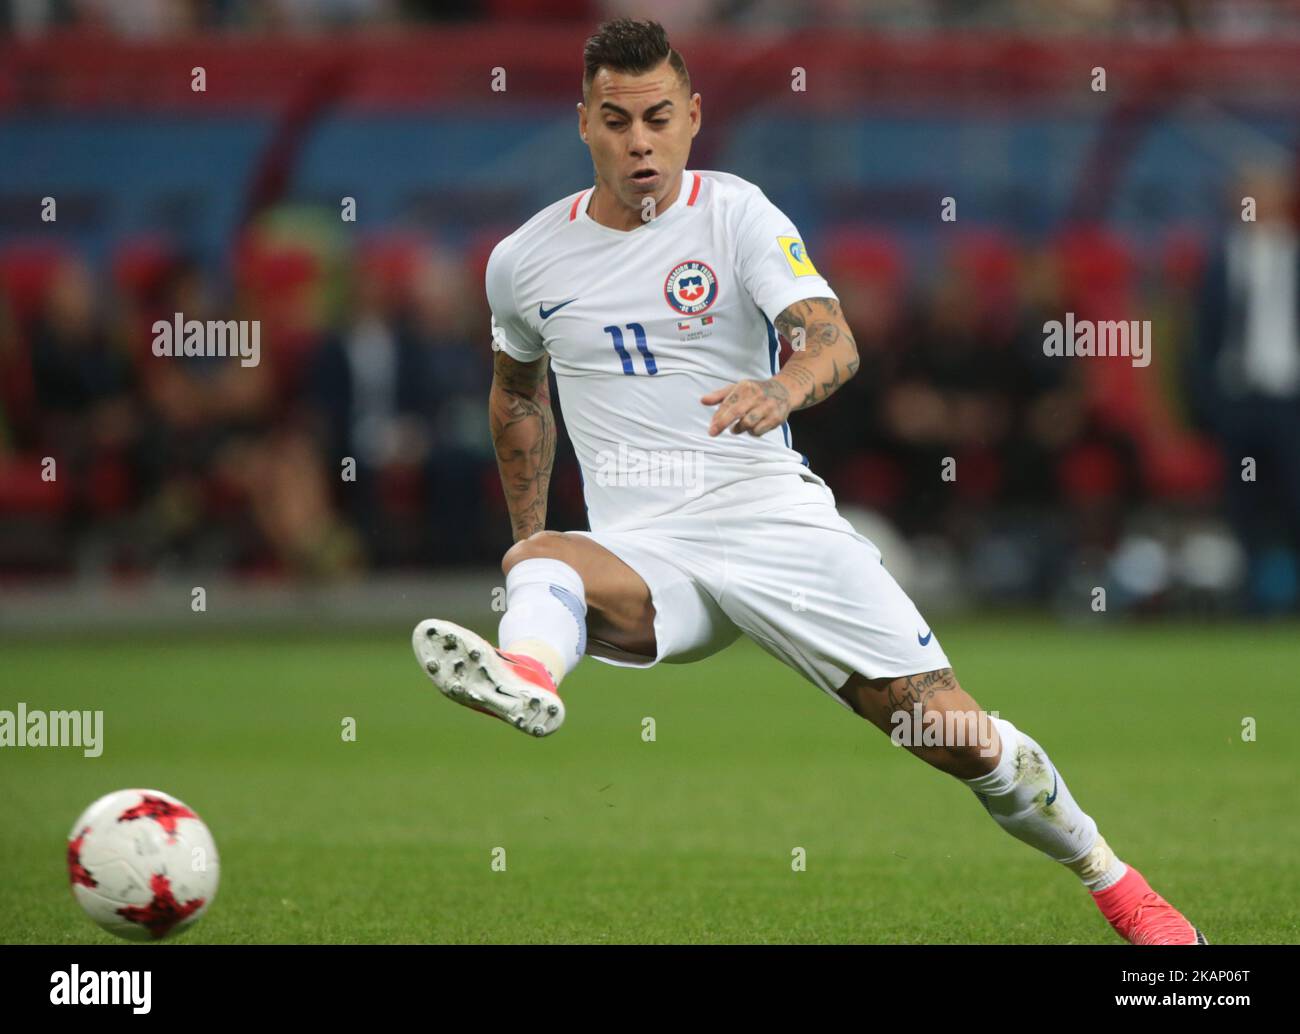 Eduardo Vargas of the Chile national football team vie for the ball during the 2017 FIFA Confederations Cup match, semi-finals between Portugal and Chile at Kazan Arena on June 28, 2017 in Kazan, Russia. (Photo by Igor Russak/NurPhoto) *** Please Use Credit from Credit Field *** Stock Photo